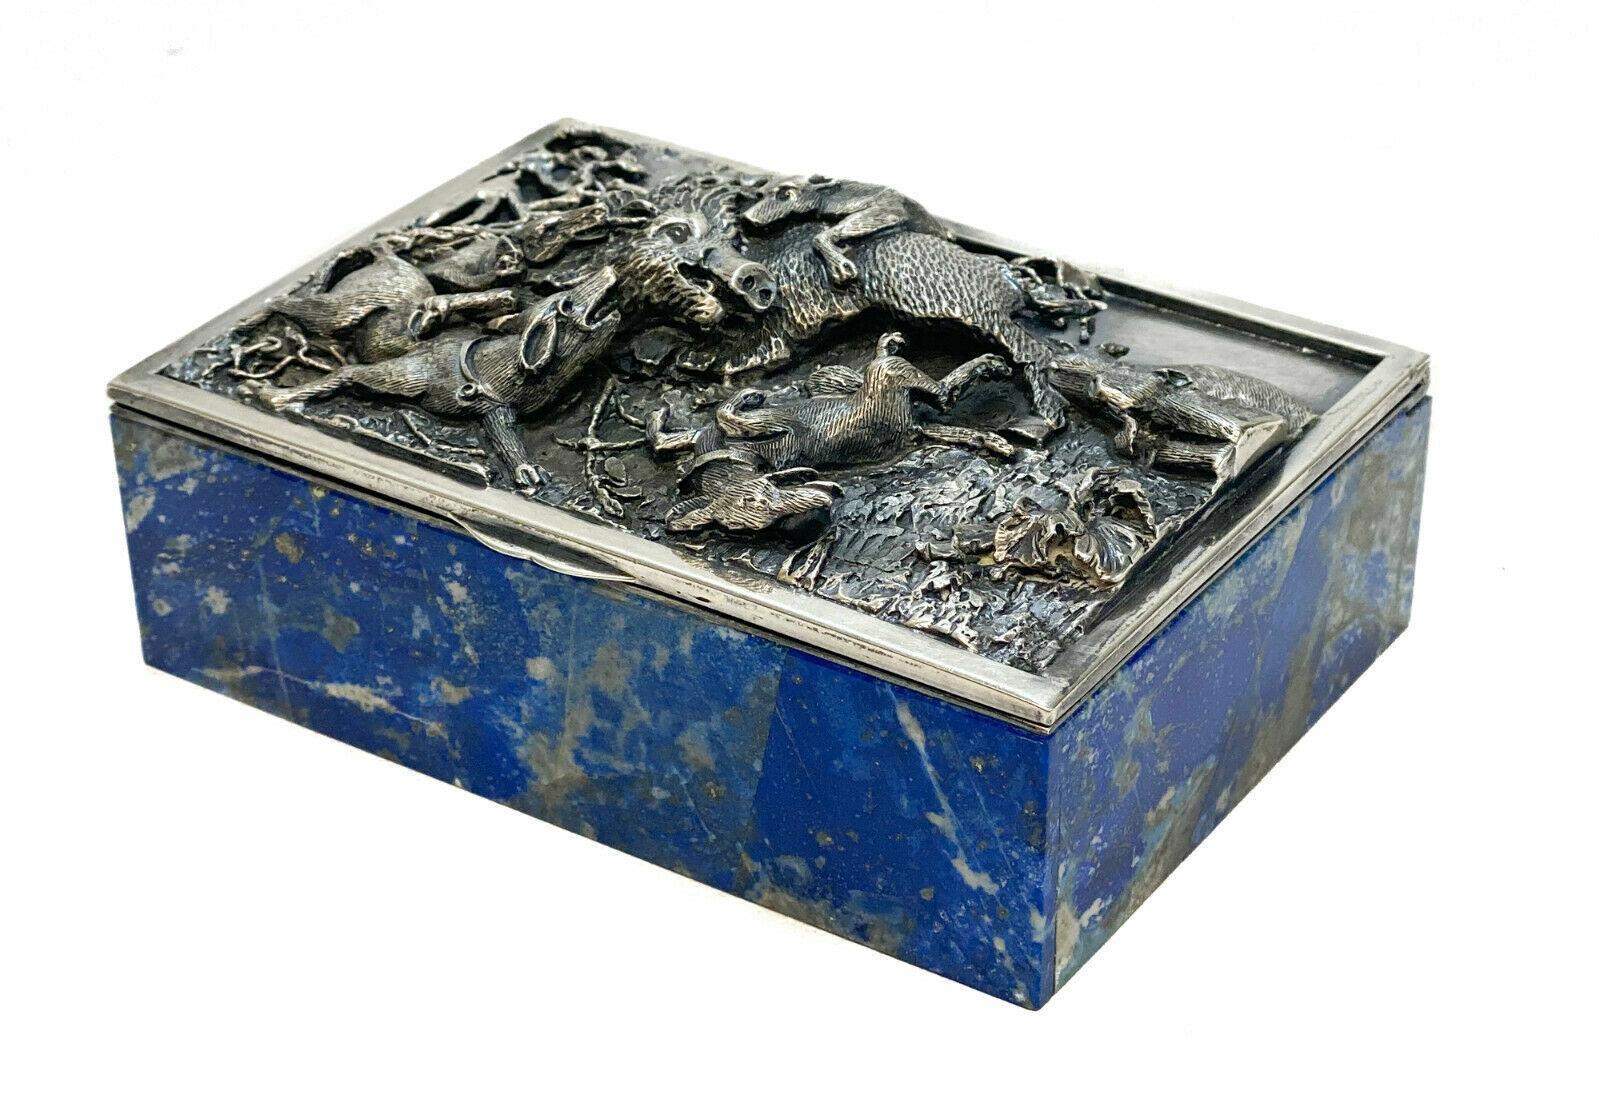 Taillan Adriano for Dunhill 800 silver lapis lazuli and white quartz cigarette box, circa 1970.
800 silver cover lid and mounts with a finely detailed high relief boar hunting scene to the central image. Lapis Lazuli to the walls and white quartz